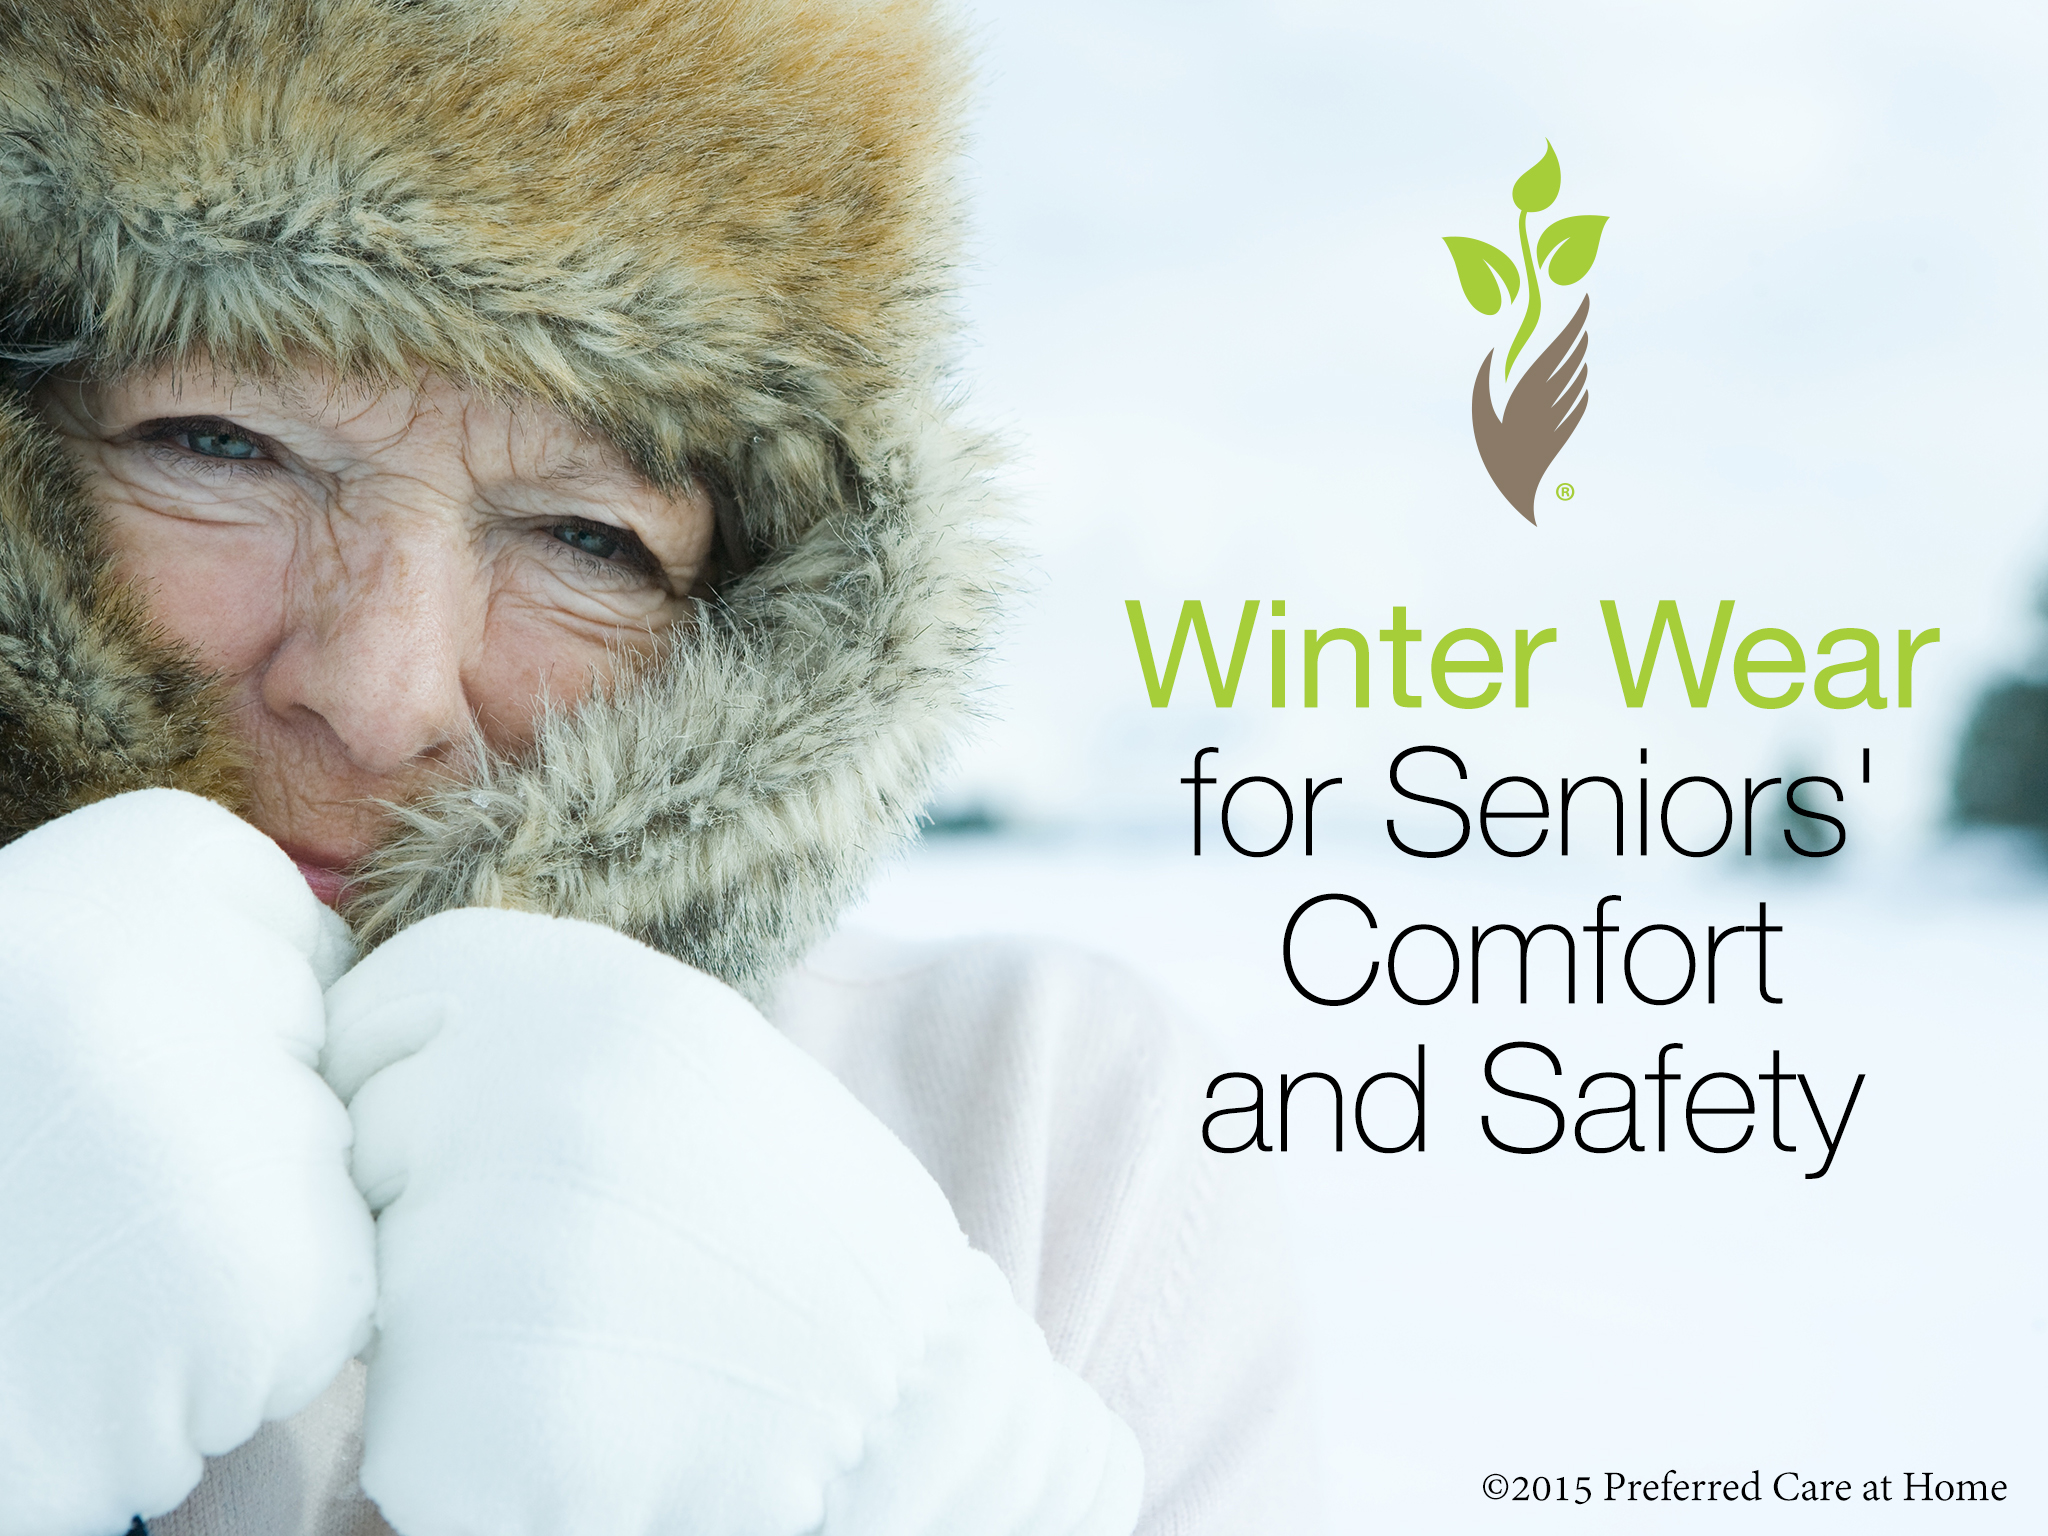 Don't Wear Two Pairs of Socks: 5 Important Winter Attire Tips for Seniors